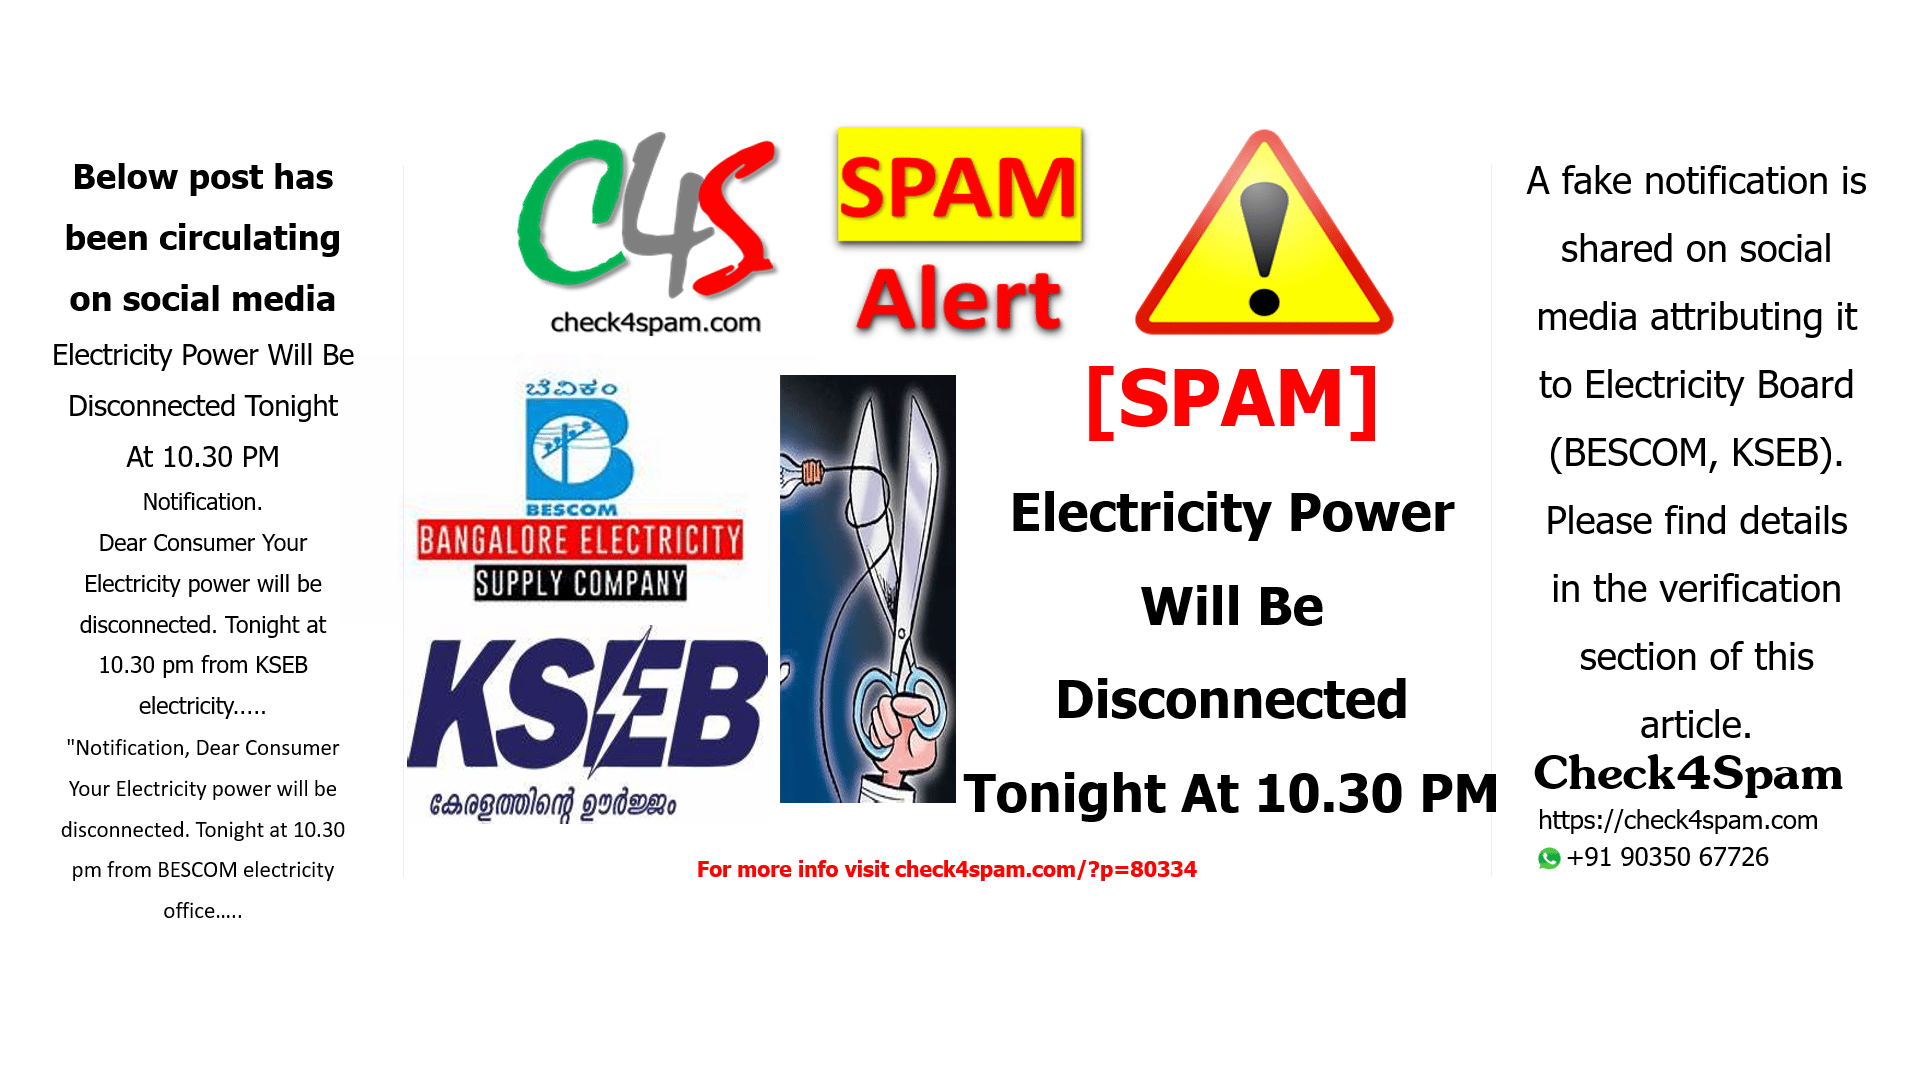 Electricity Power Will Be Disconnected Tonight At 10.30 PM